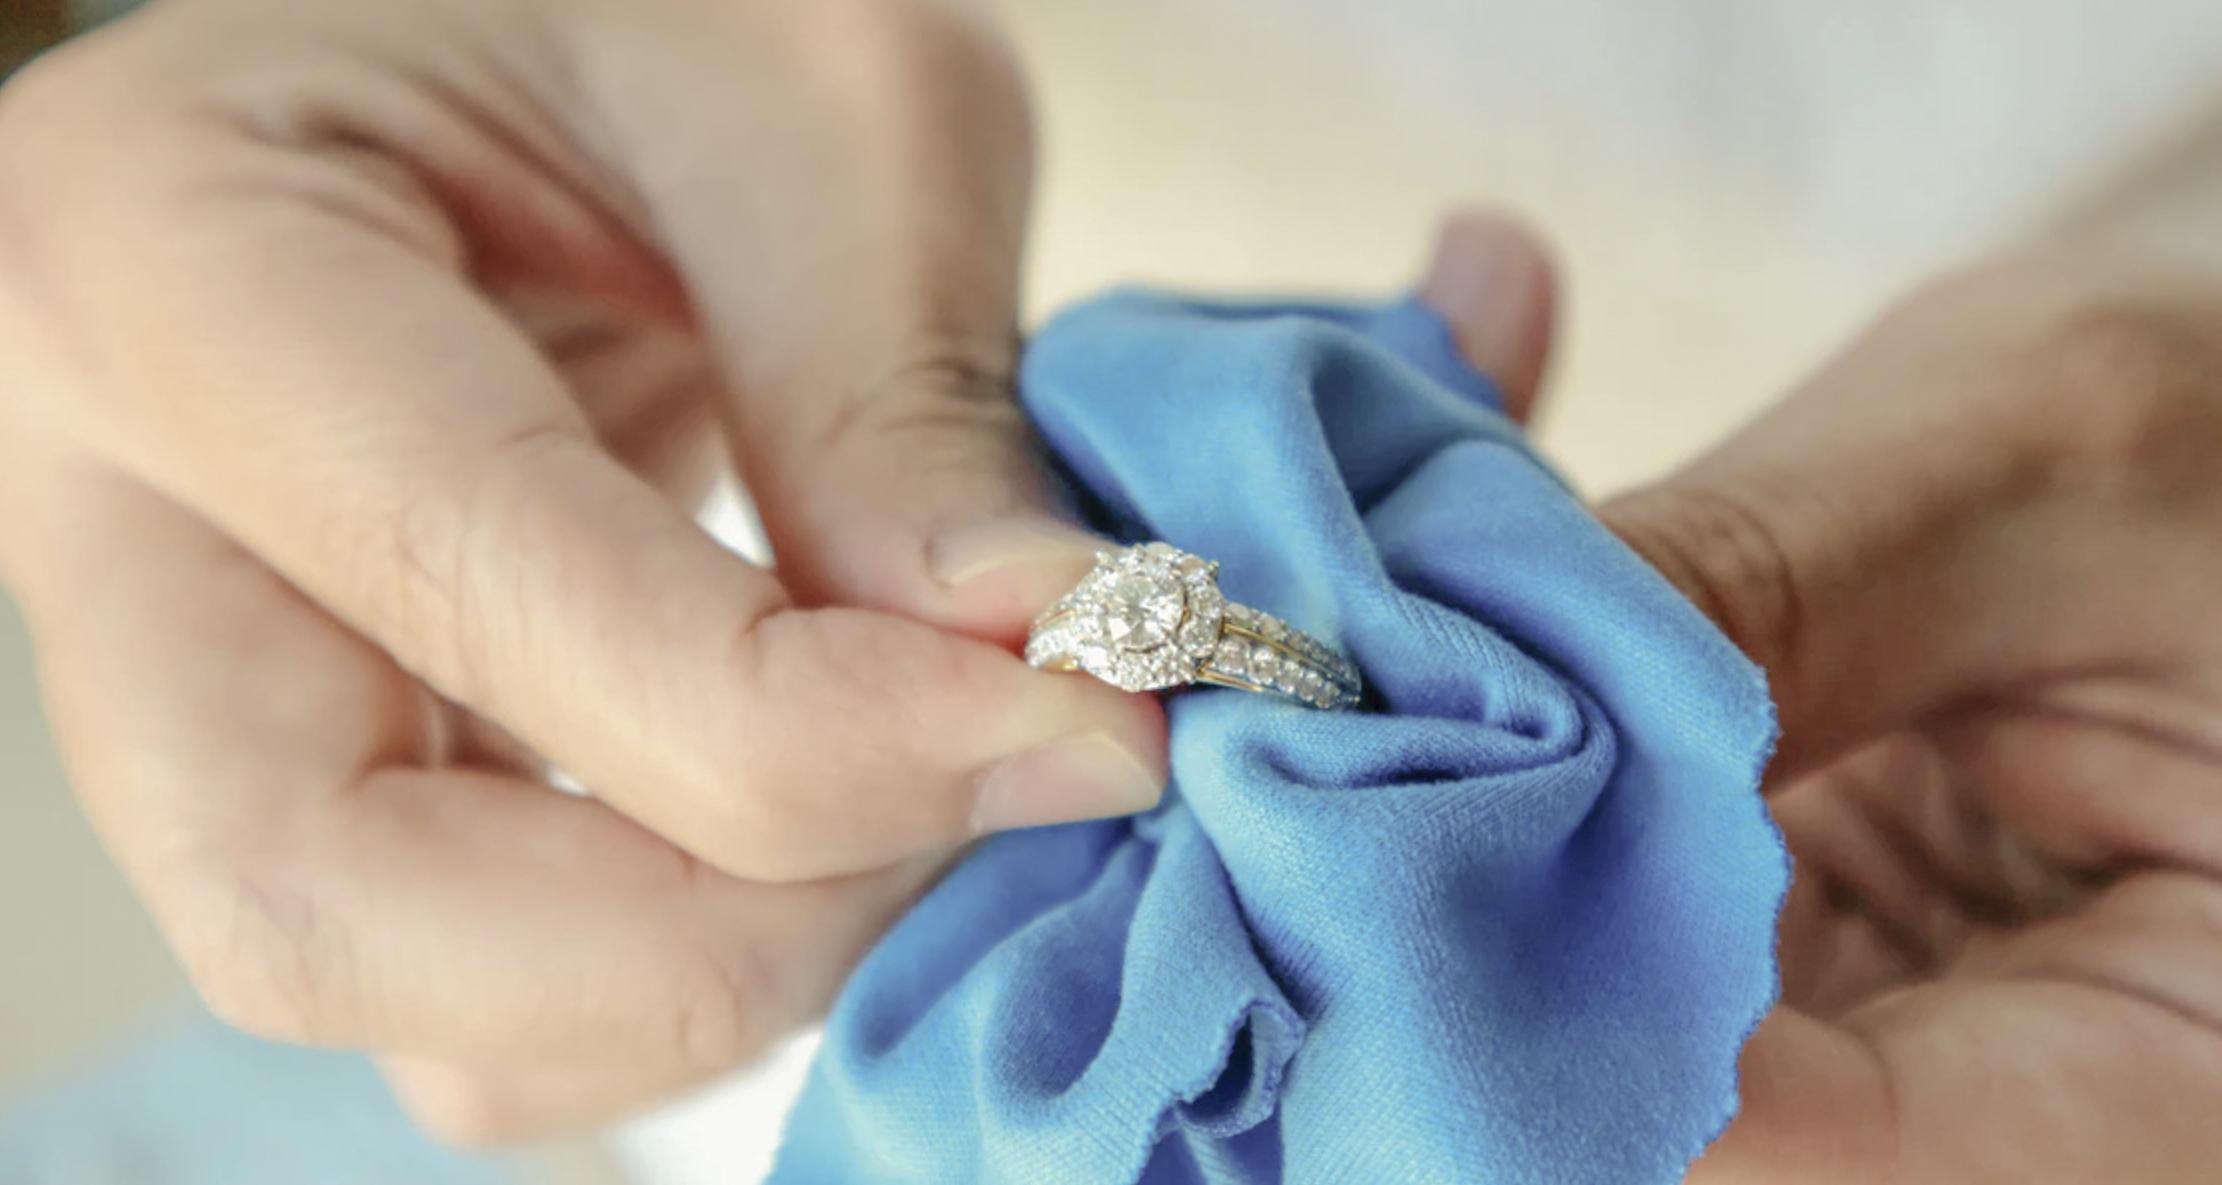 clean a diamond ring with hydrogen peroxide